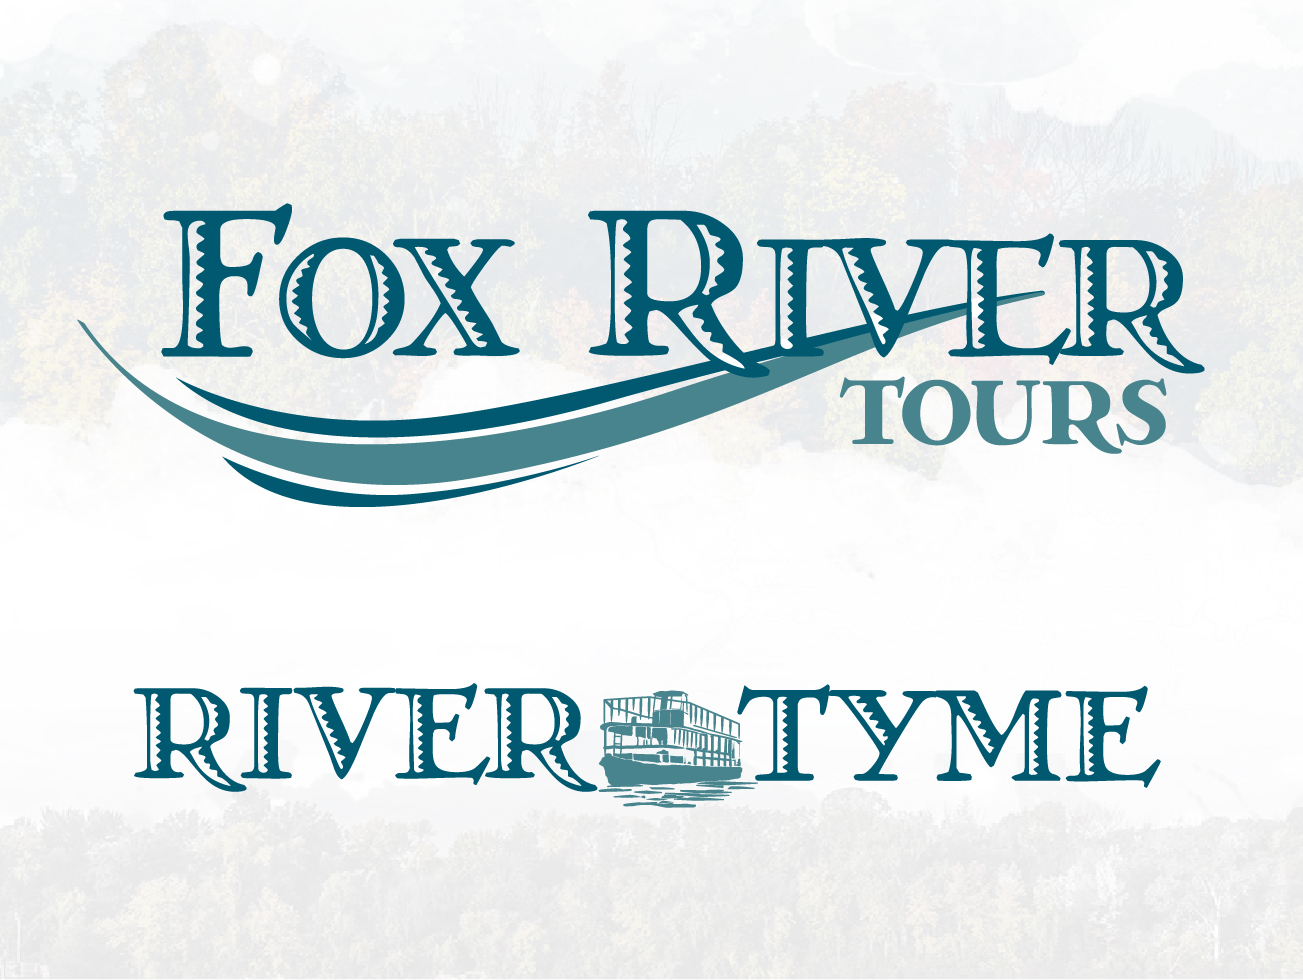 Fox River Tours and River Tyme logos